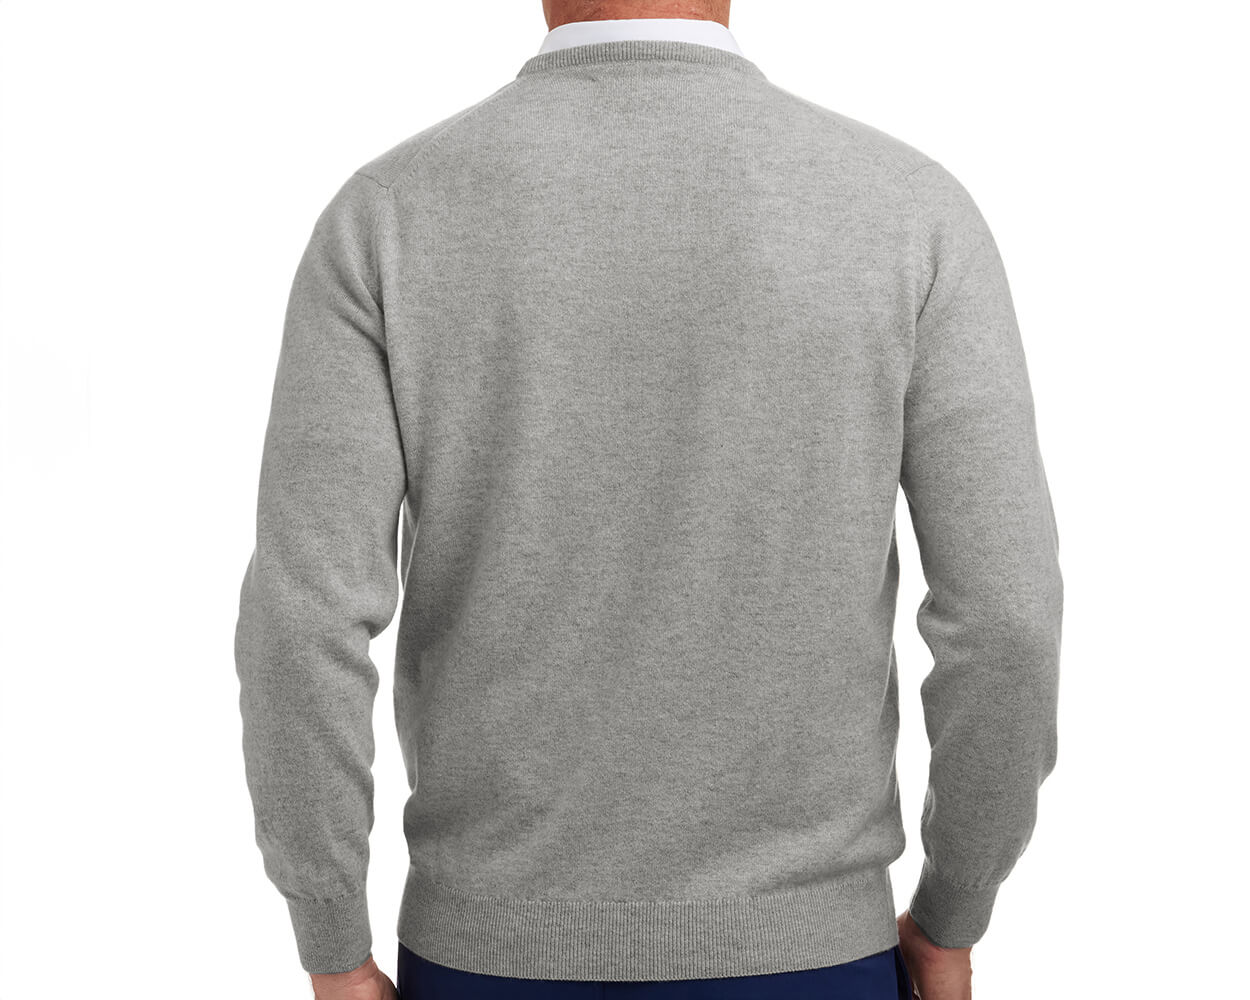 Holderness & Bourne The Buckley Men's Light Gray Cashmere Sweater